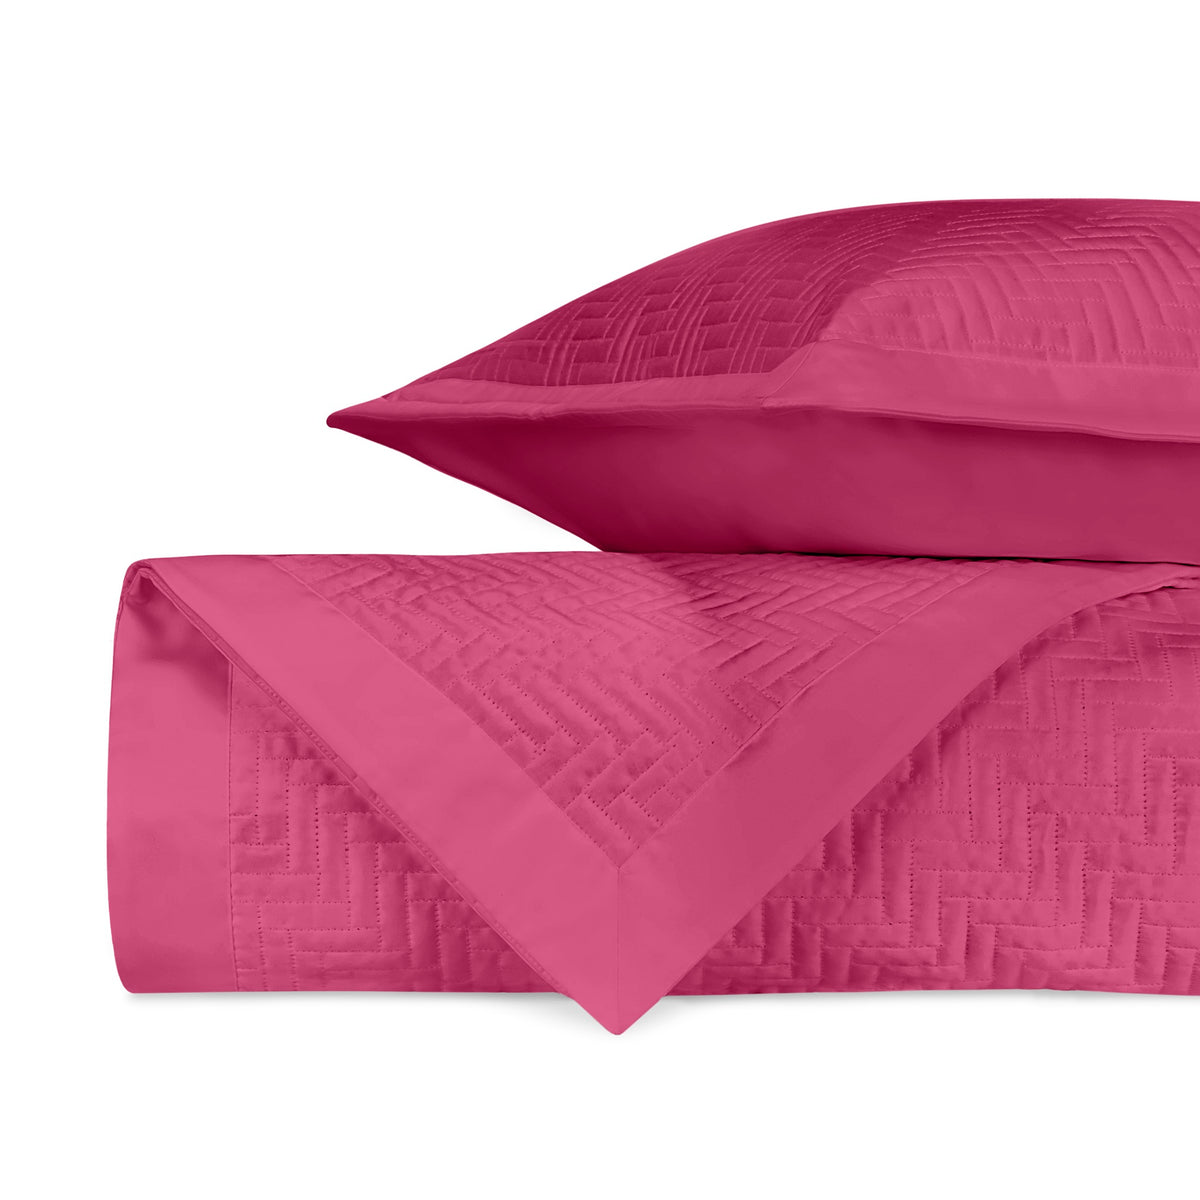 Stack Image of Home Treasures Baxter Royal Sateen Quilted Bedding in Color Bright Pink